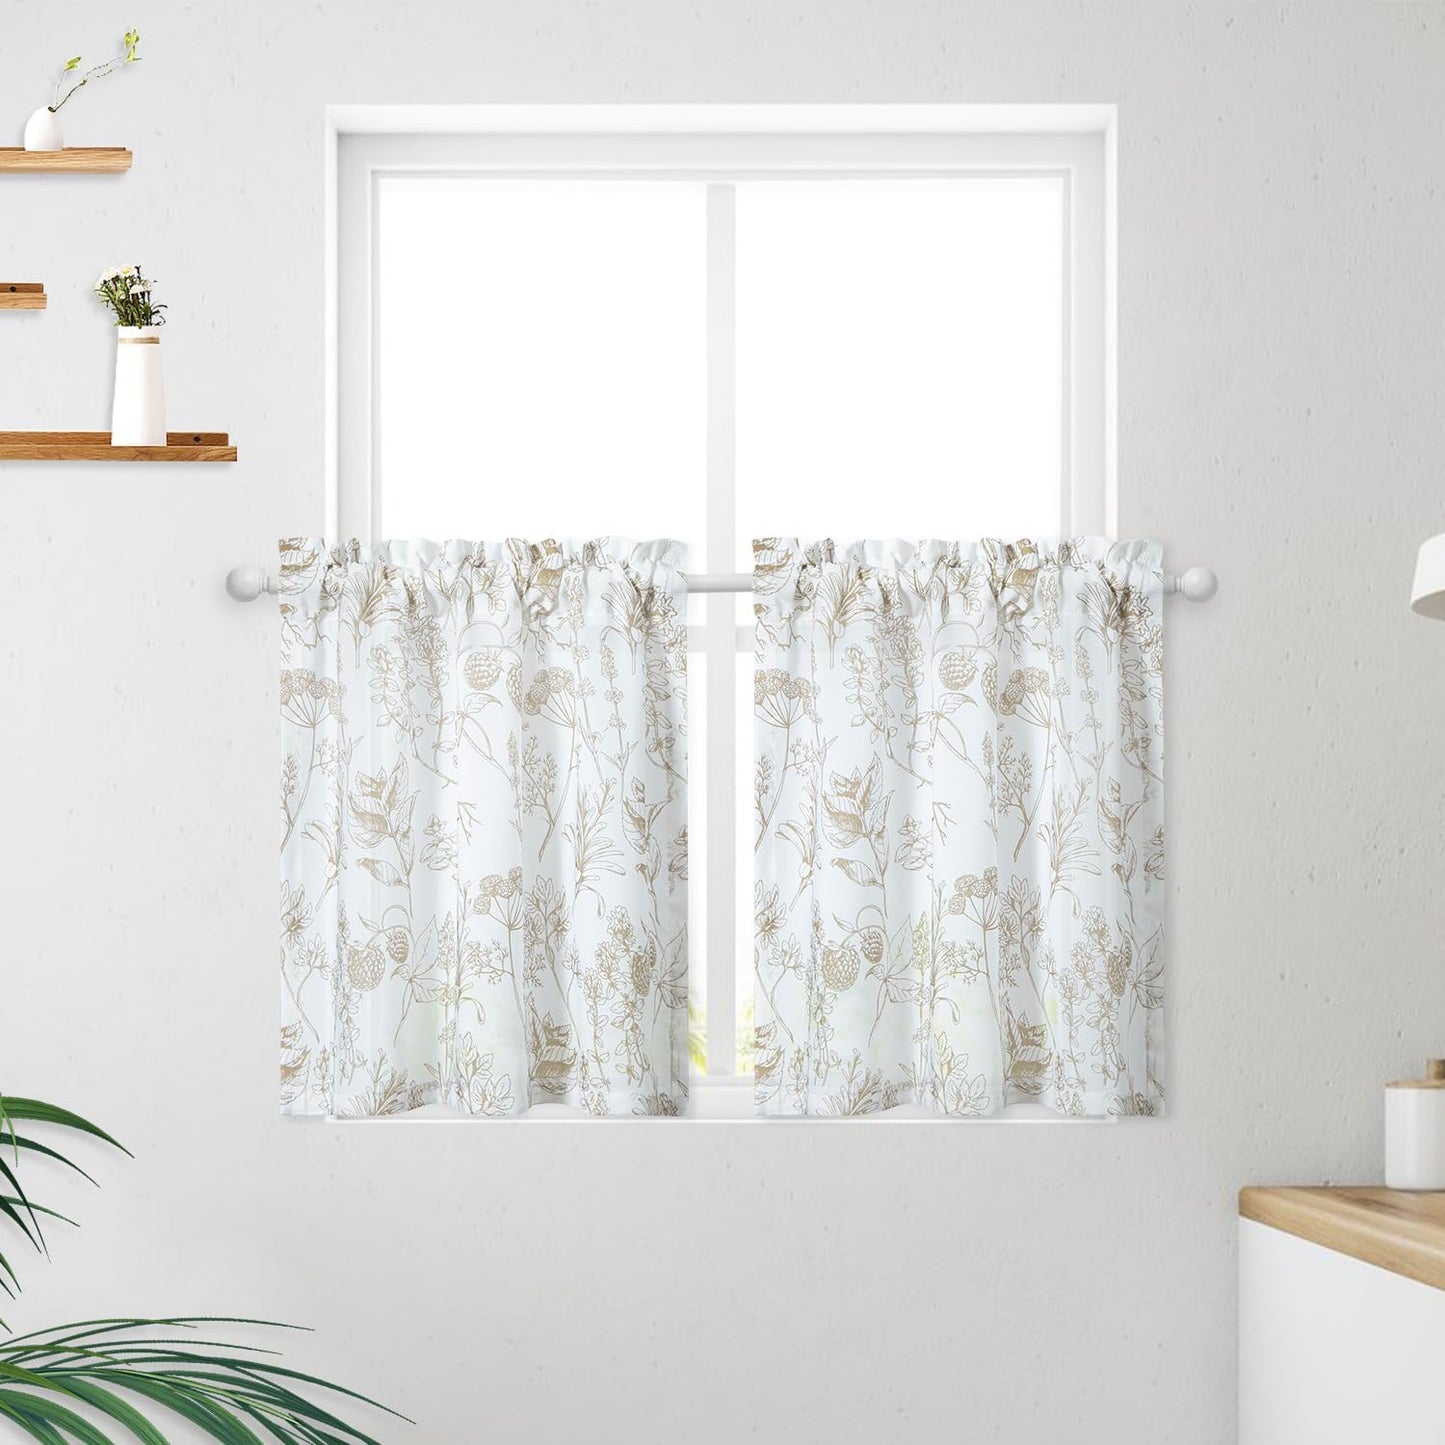 VOGOL Colorful Floral Print Tier Curtains, 2 Panels Smooth Textured Decorative Cafe Curtain, Rod Pocket Sheer Drapery for Farmhouse, W 30 X L 24  VOGOL Mn011 W30 X L24 